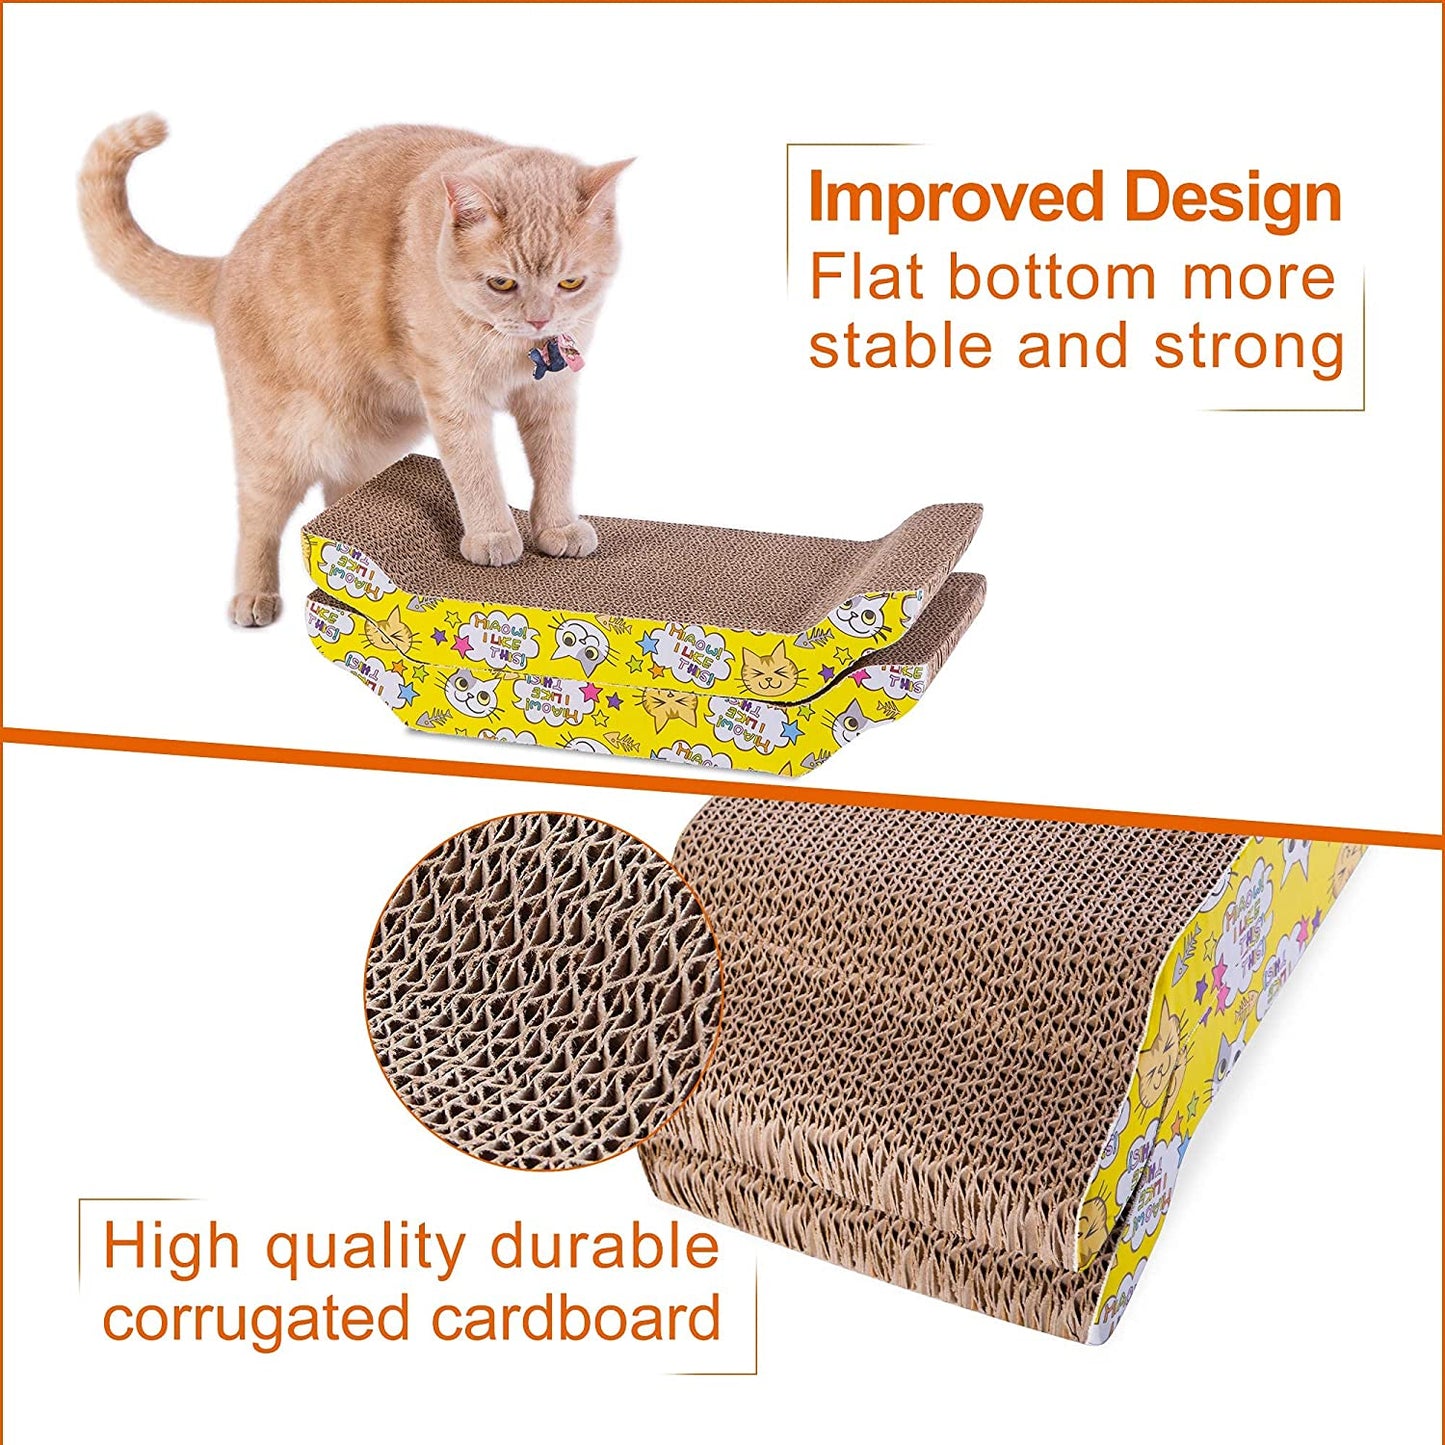 PETTOM - Cat Scratching Board Protects